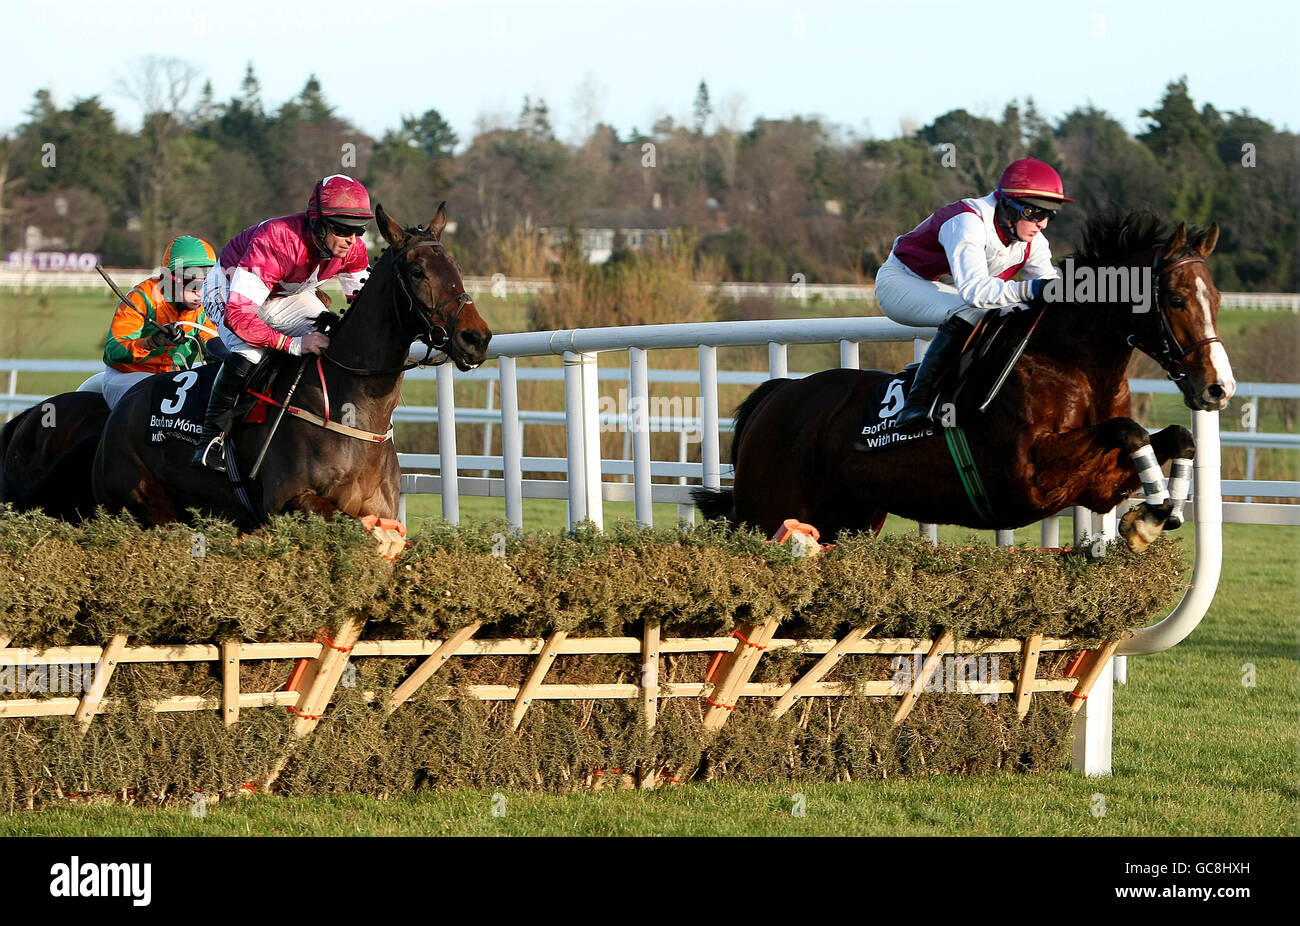 Kings Bastion (right) ridden by T.Carroll jumping clear to win in the Bord Na Mona - Clean Air Maiden Hurdle during the Christmas Festival at Leopardstown Racecourse, Dublin, Ireland. Stock Photo